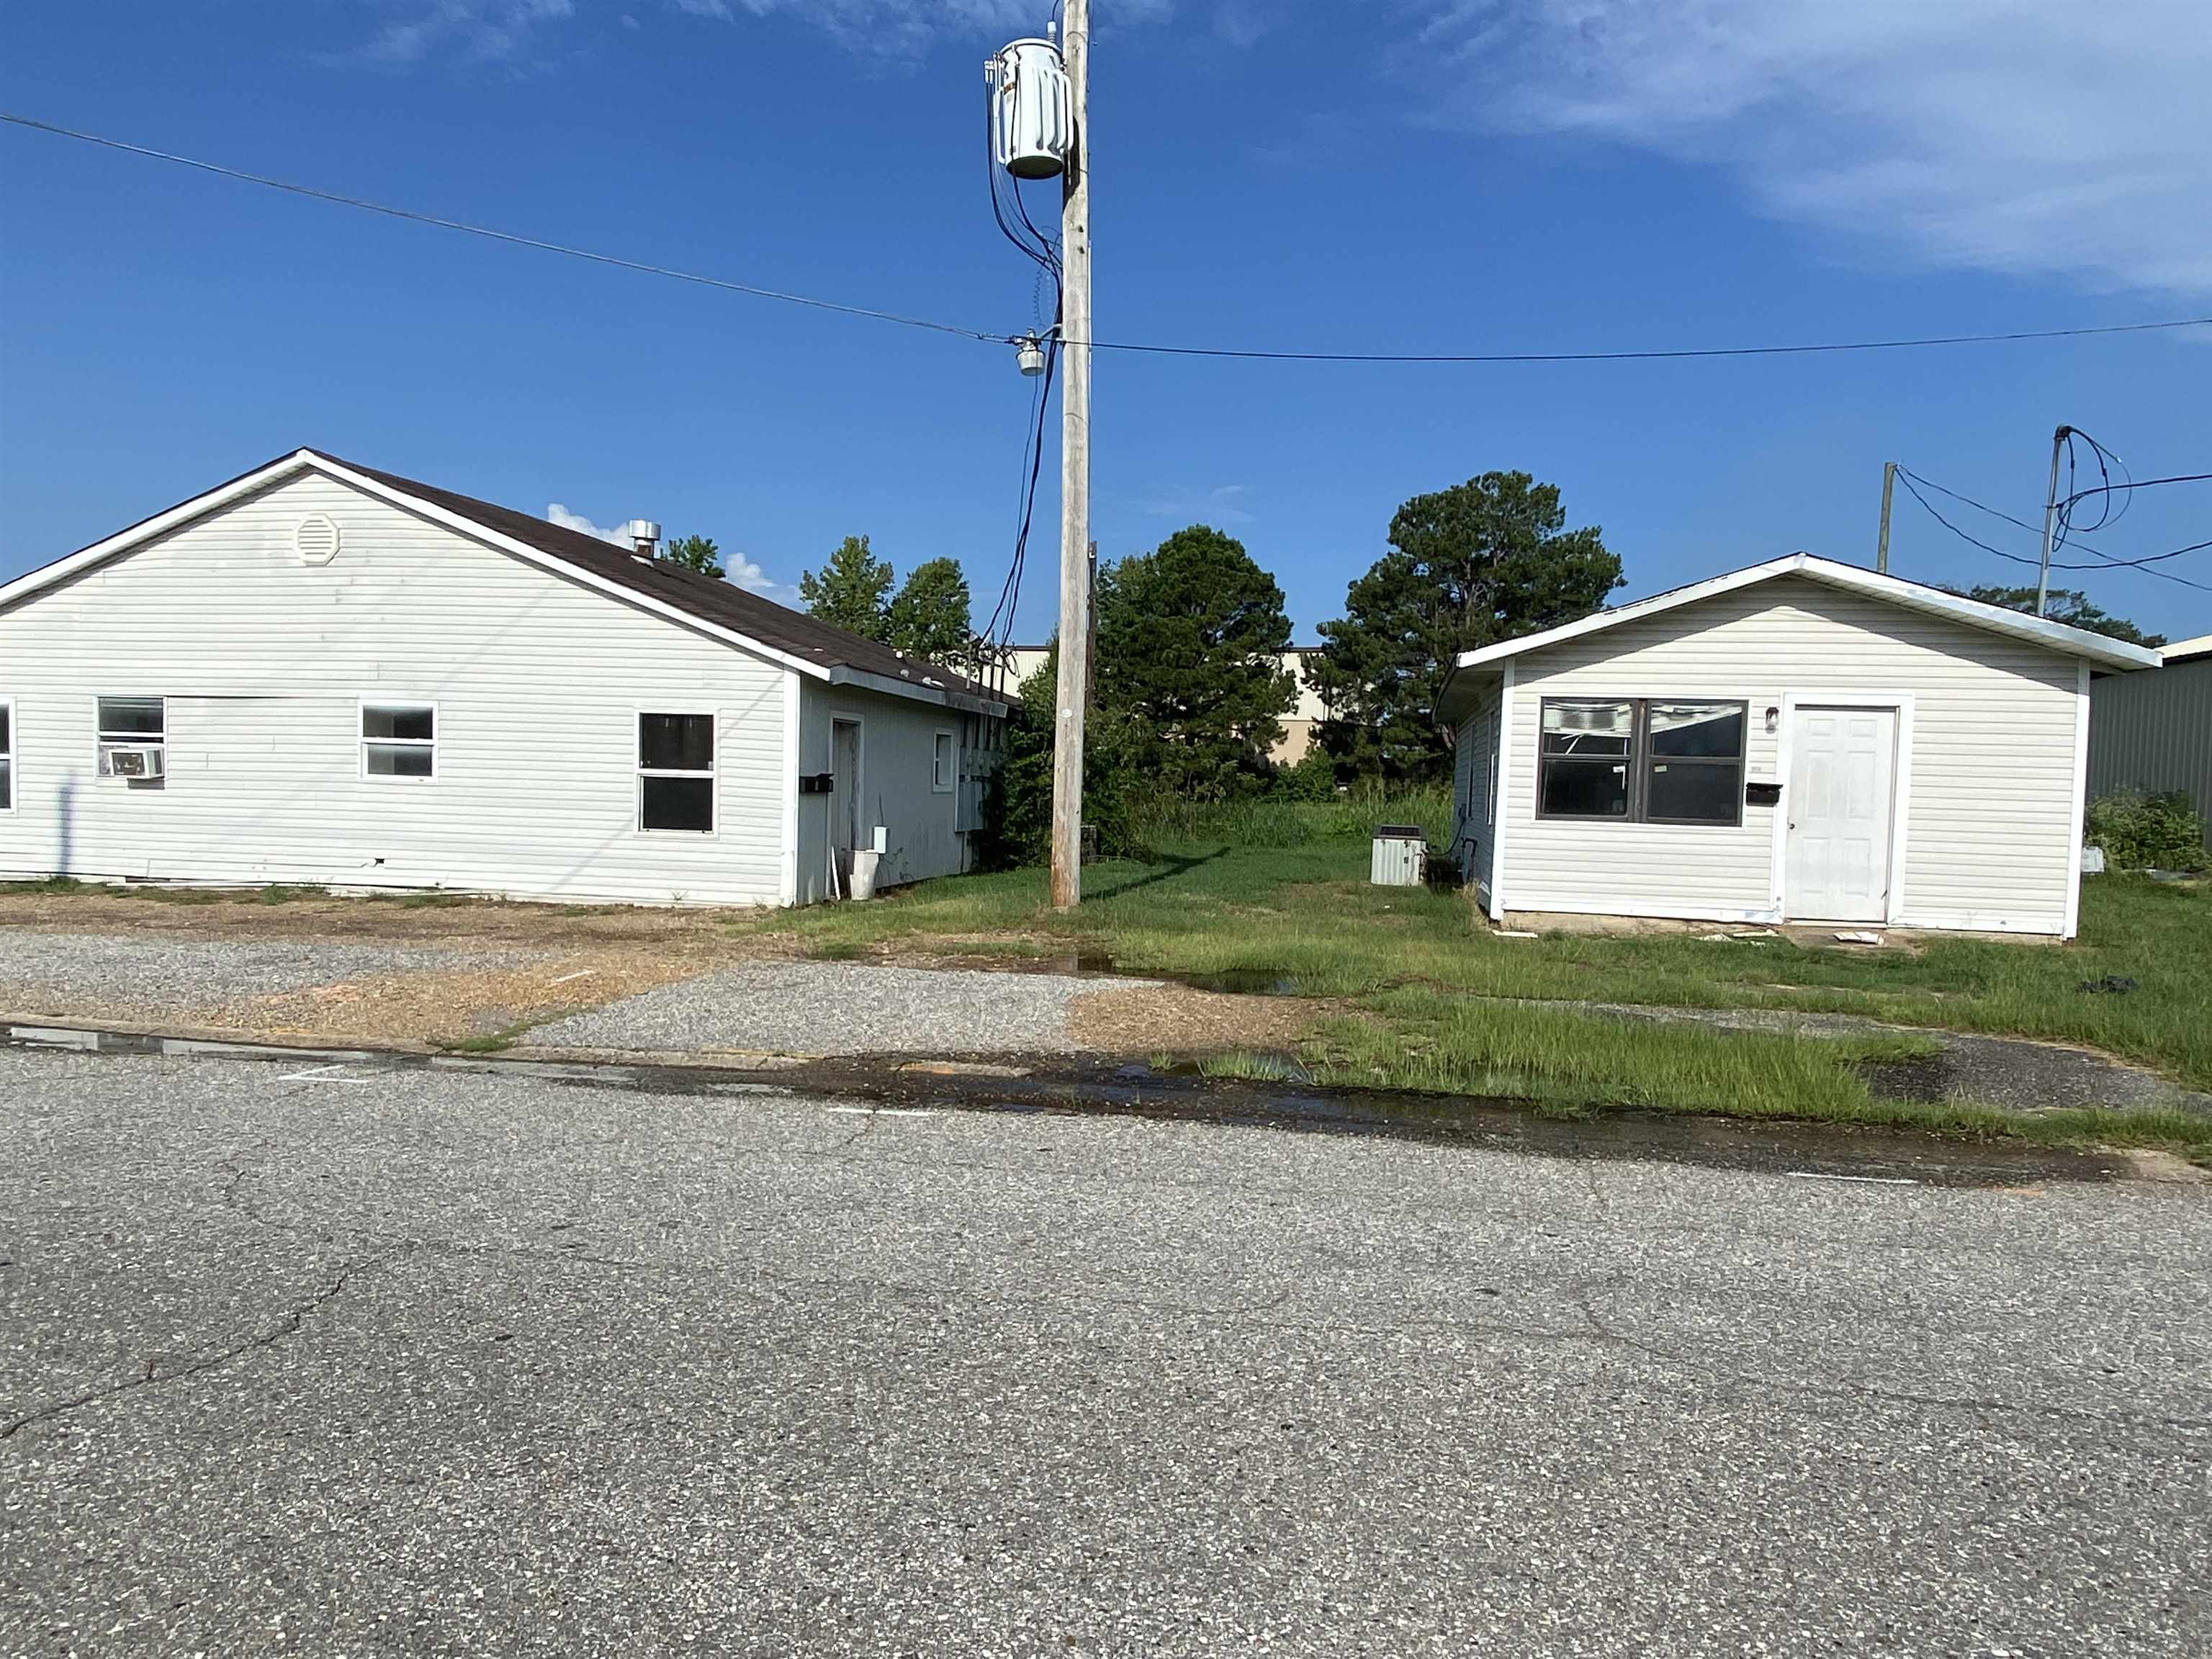 Commercial / Industrial for sale – 1014 S Main 1018 and 1020 South Main Street included  Nashville, AR